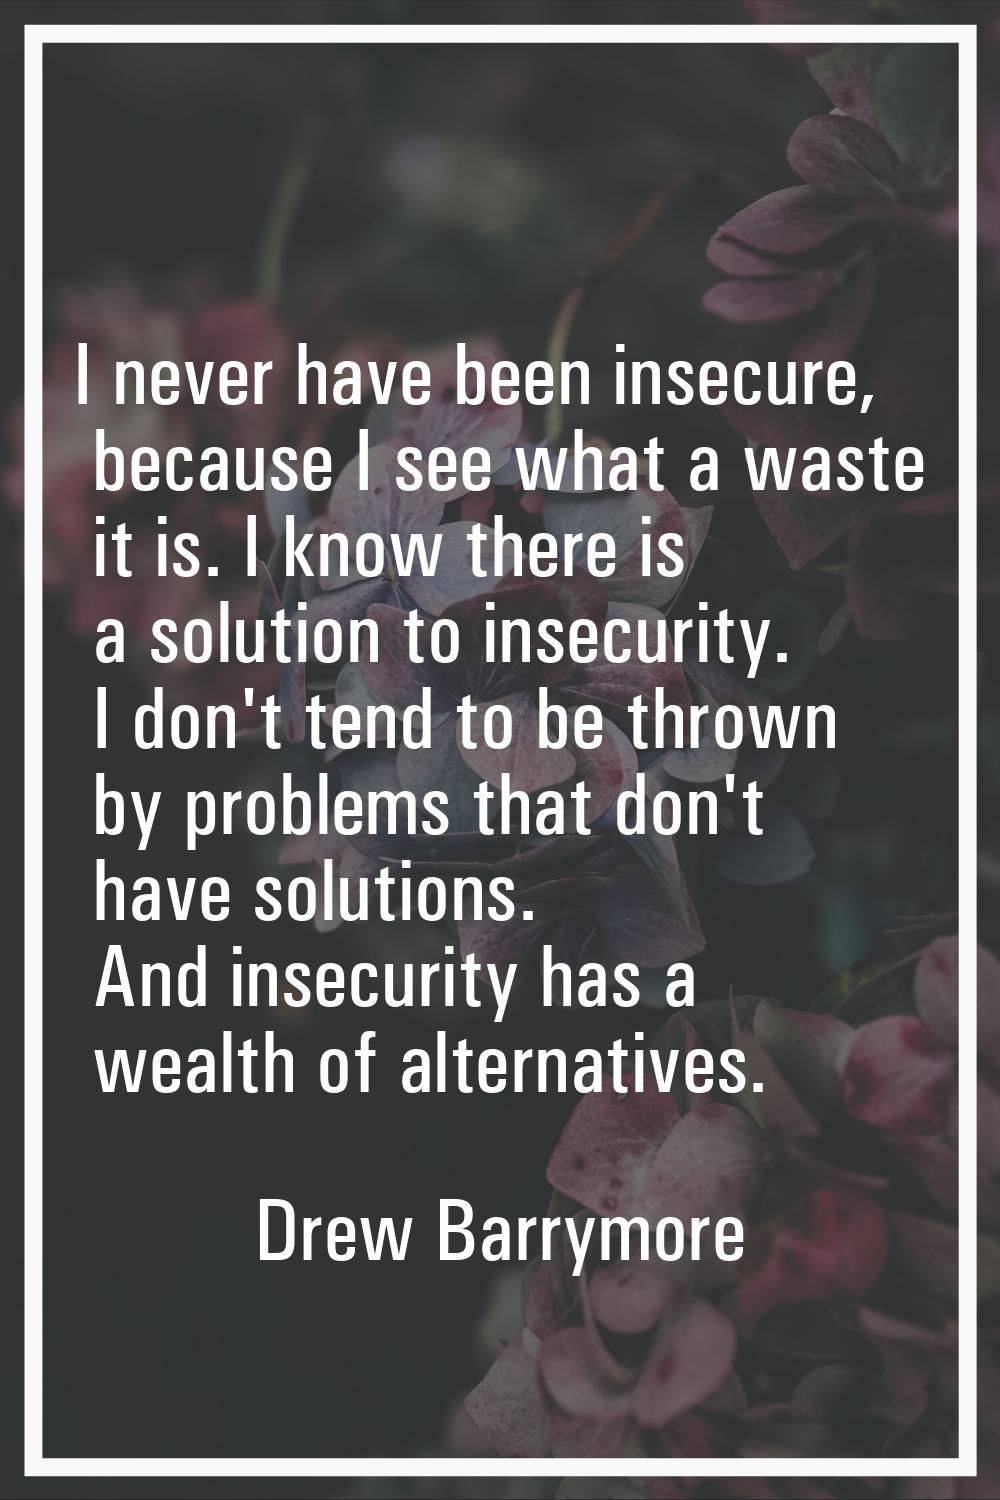 I never have been insecure, because I see what a waste it is. I know there is a solution to insecur